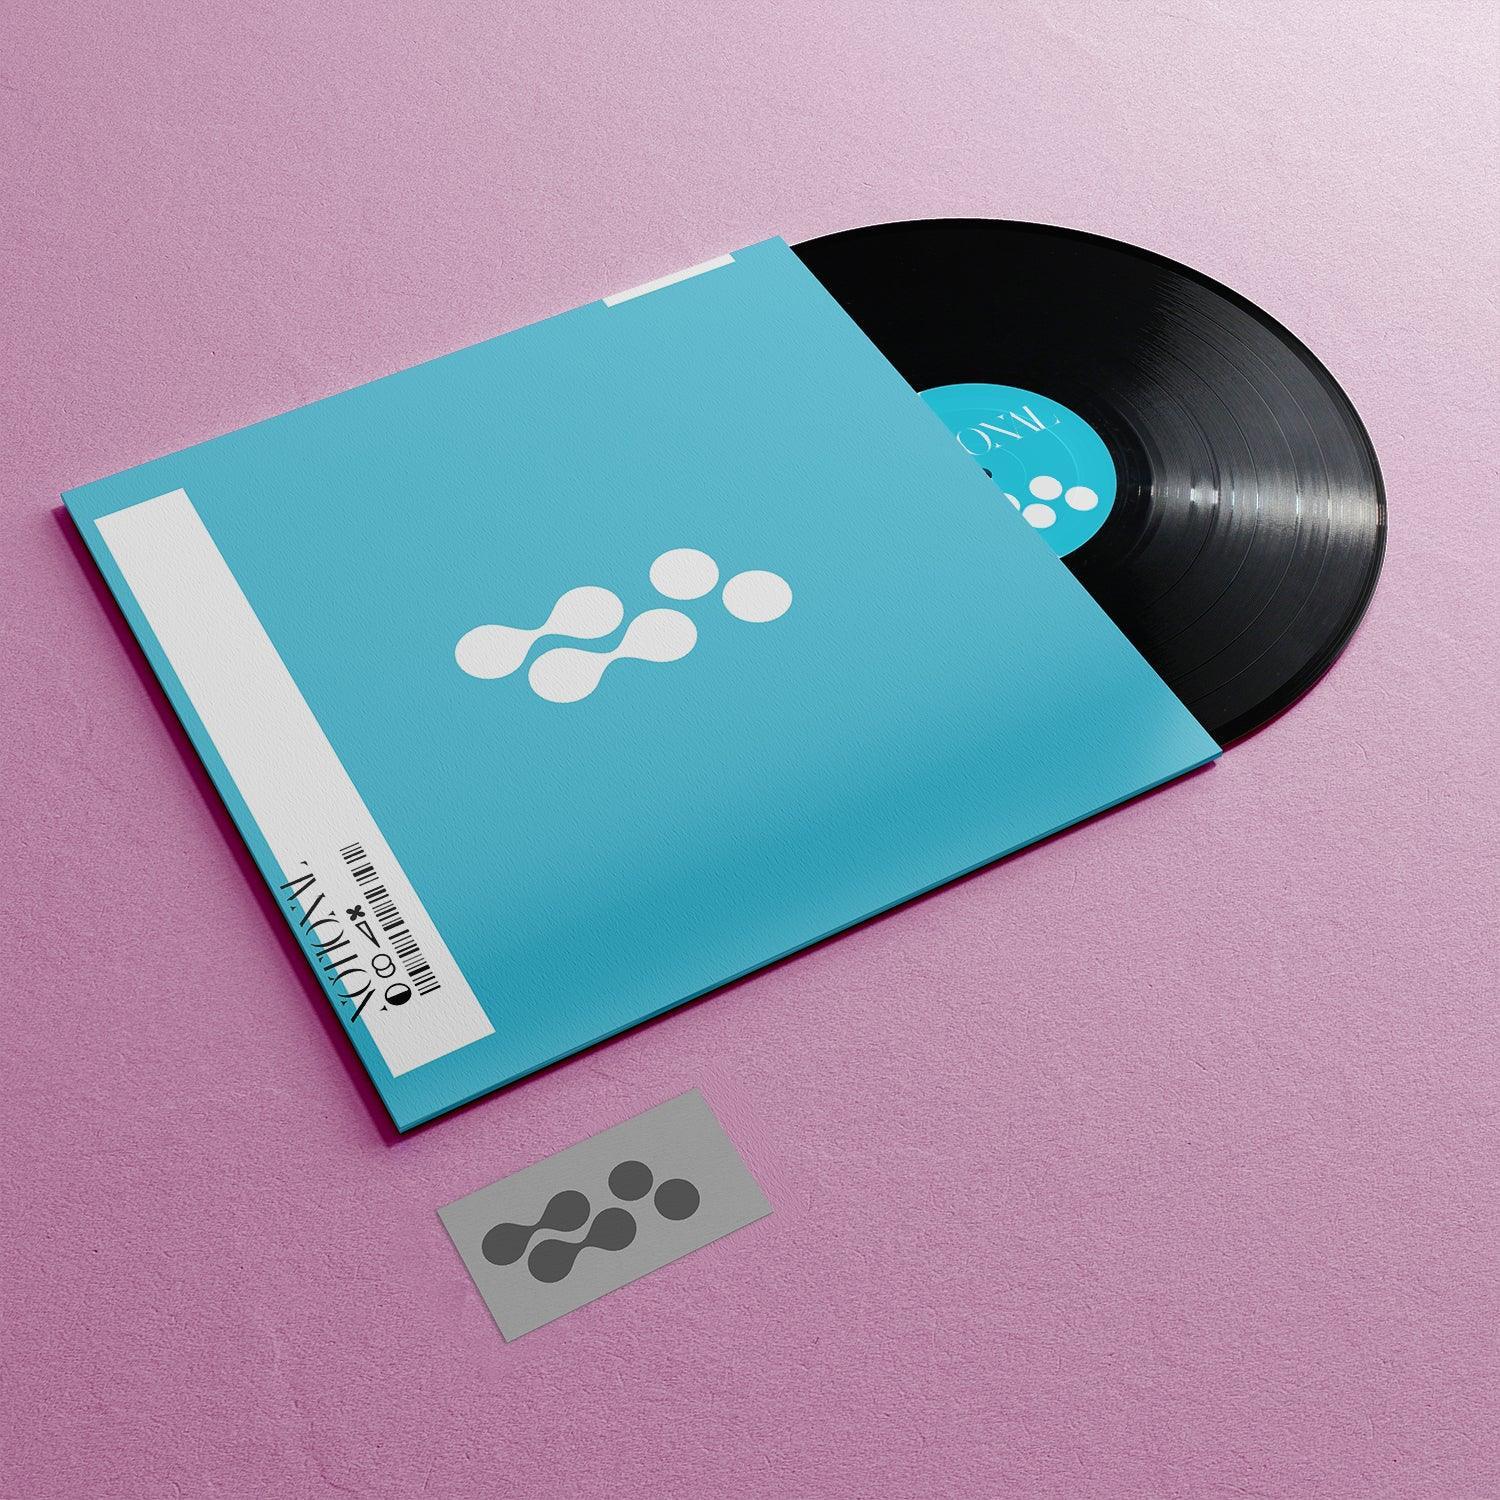 Photorealistic 12 Inch Vinyl Record Mockup: Editable Disc in Sleeve & Download Card with Stunning Album Art.